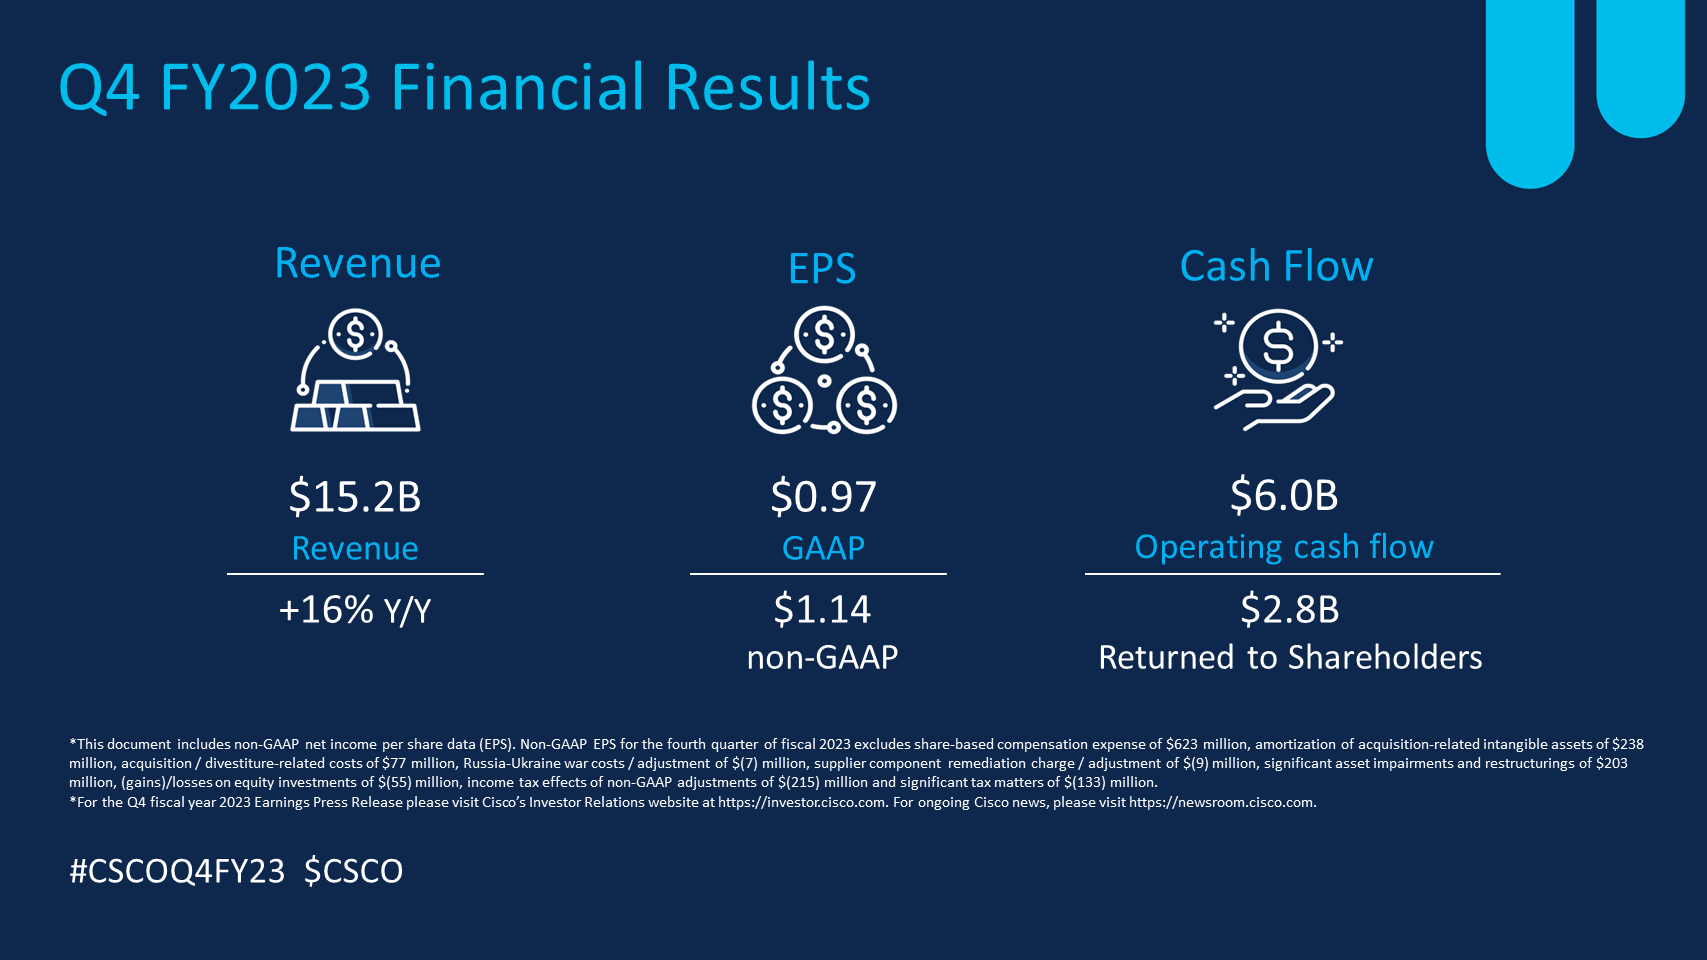 Cisco Q4 FY2023 Financial Results Infographic